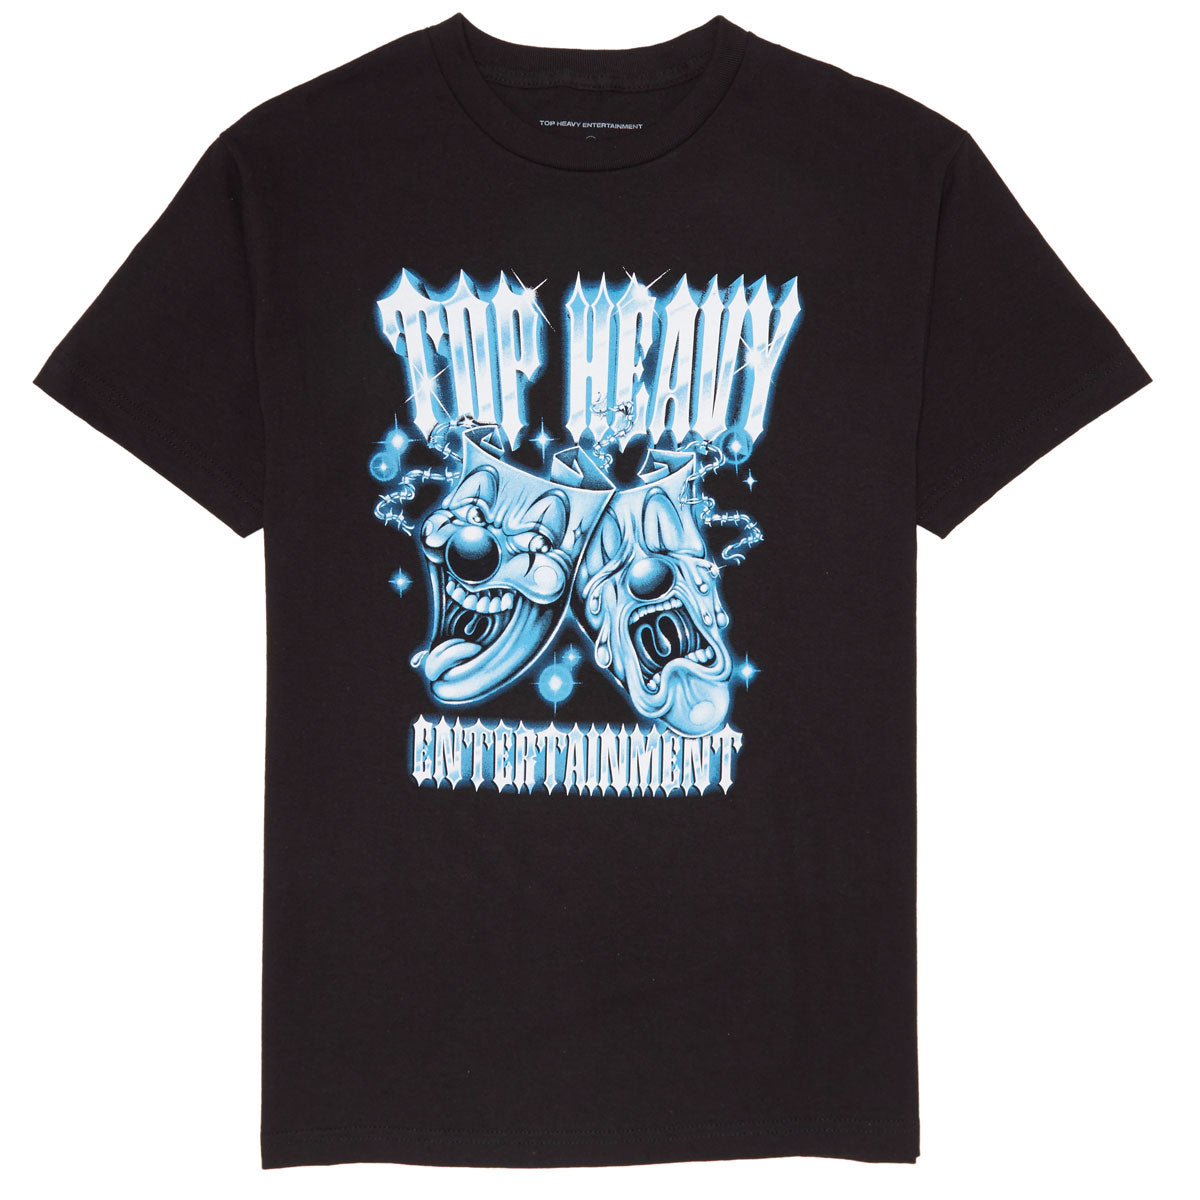 Top Heavy Cry Later T-Shirt - Black image 1